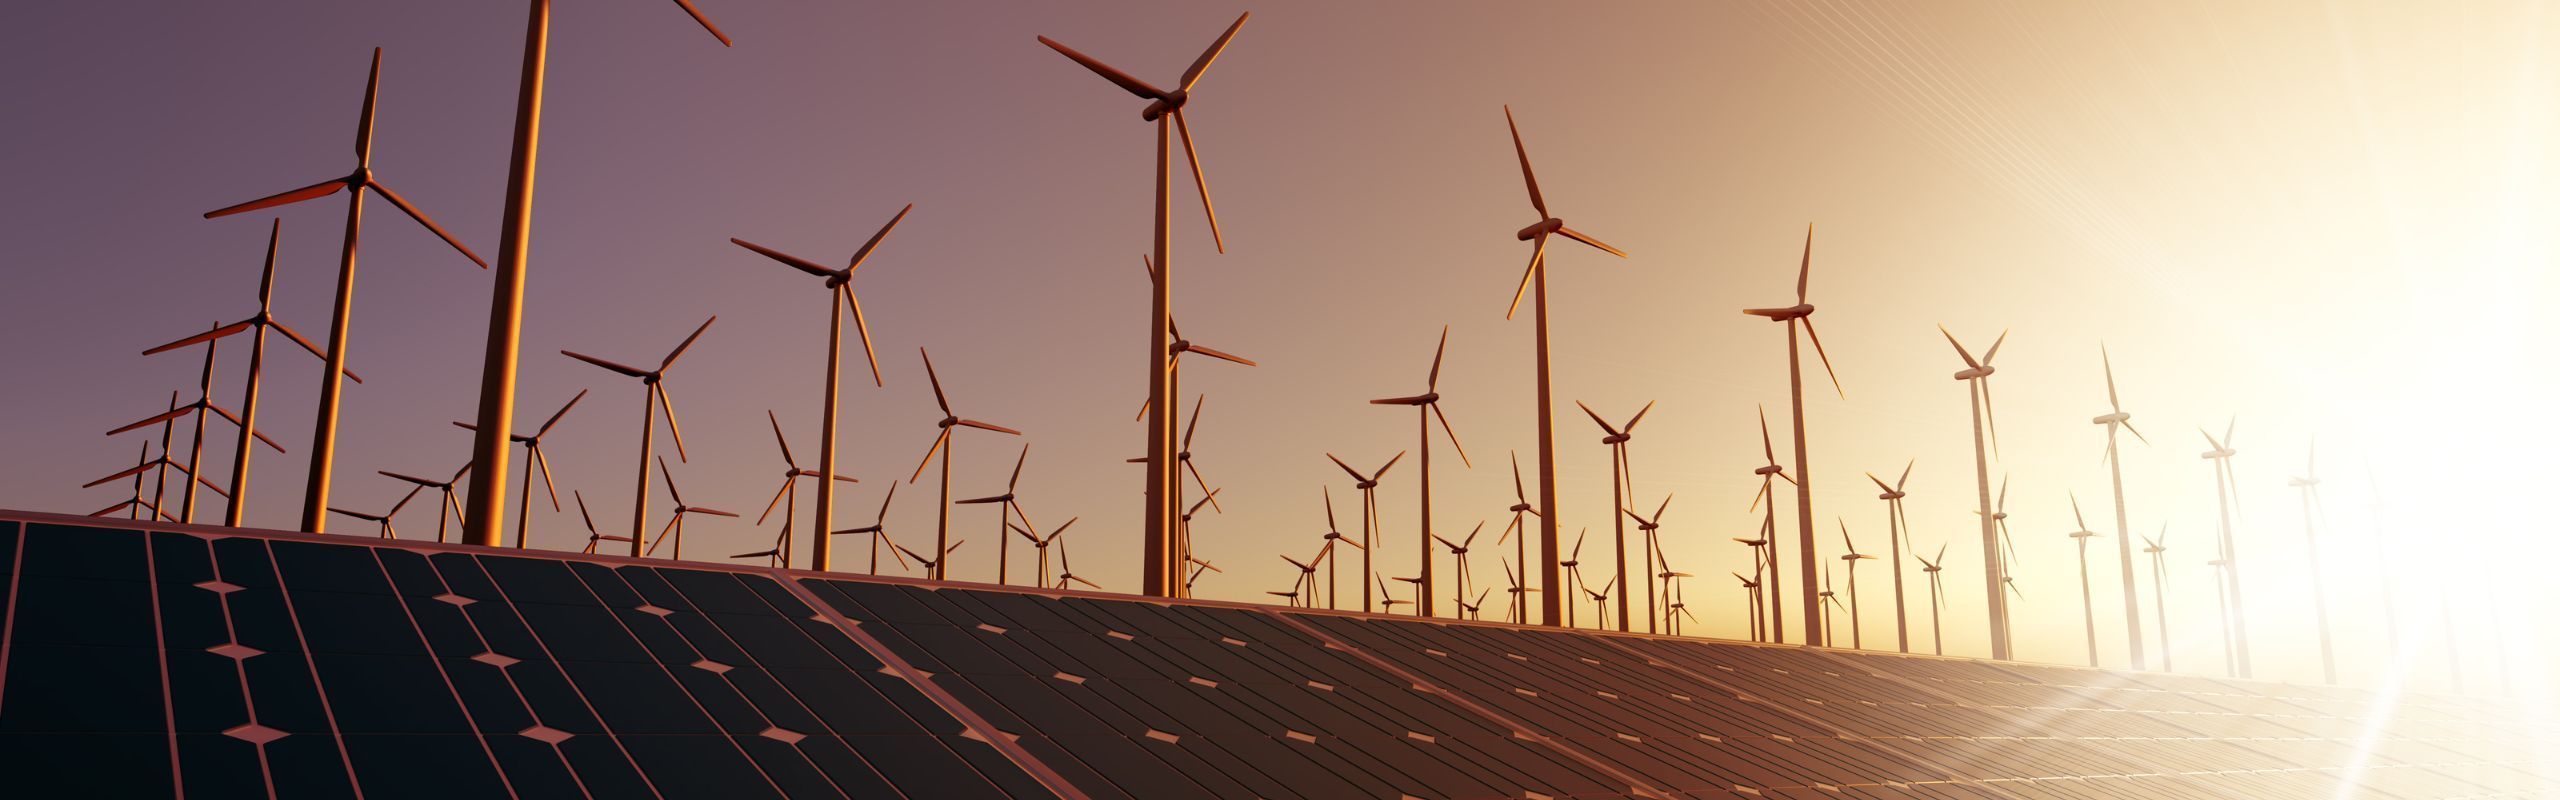 Image of wind turbines and solar panels against a sunset